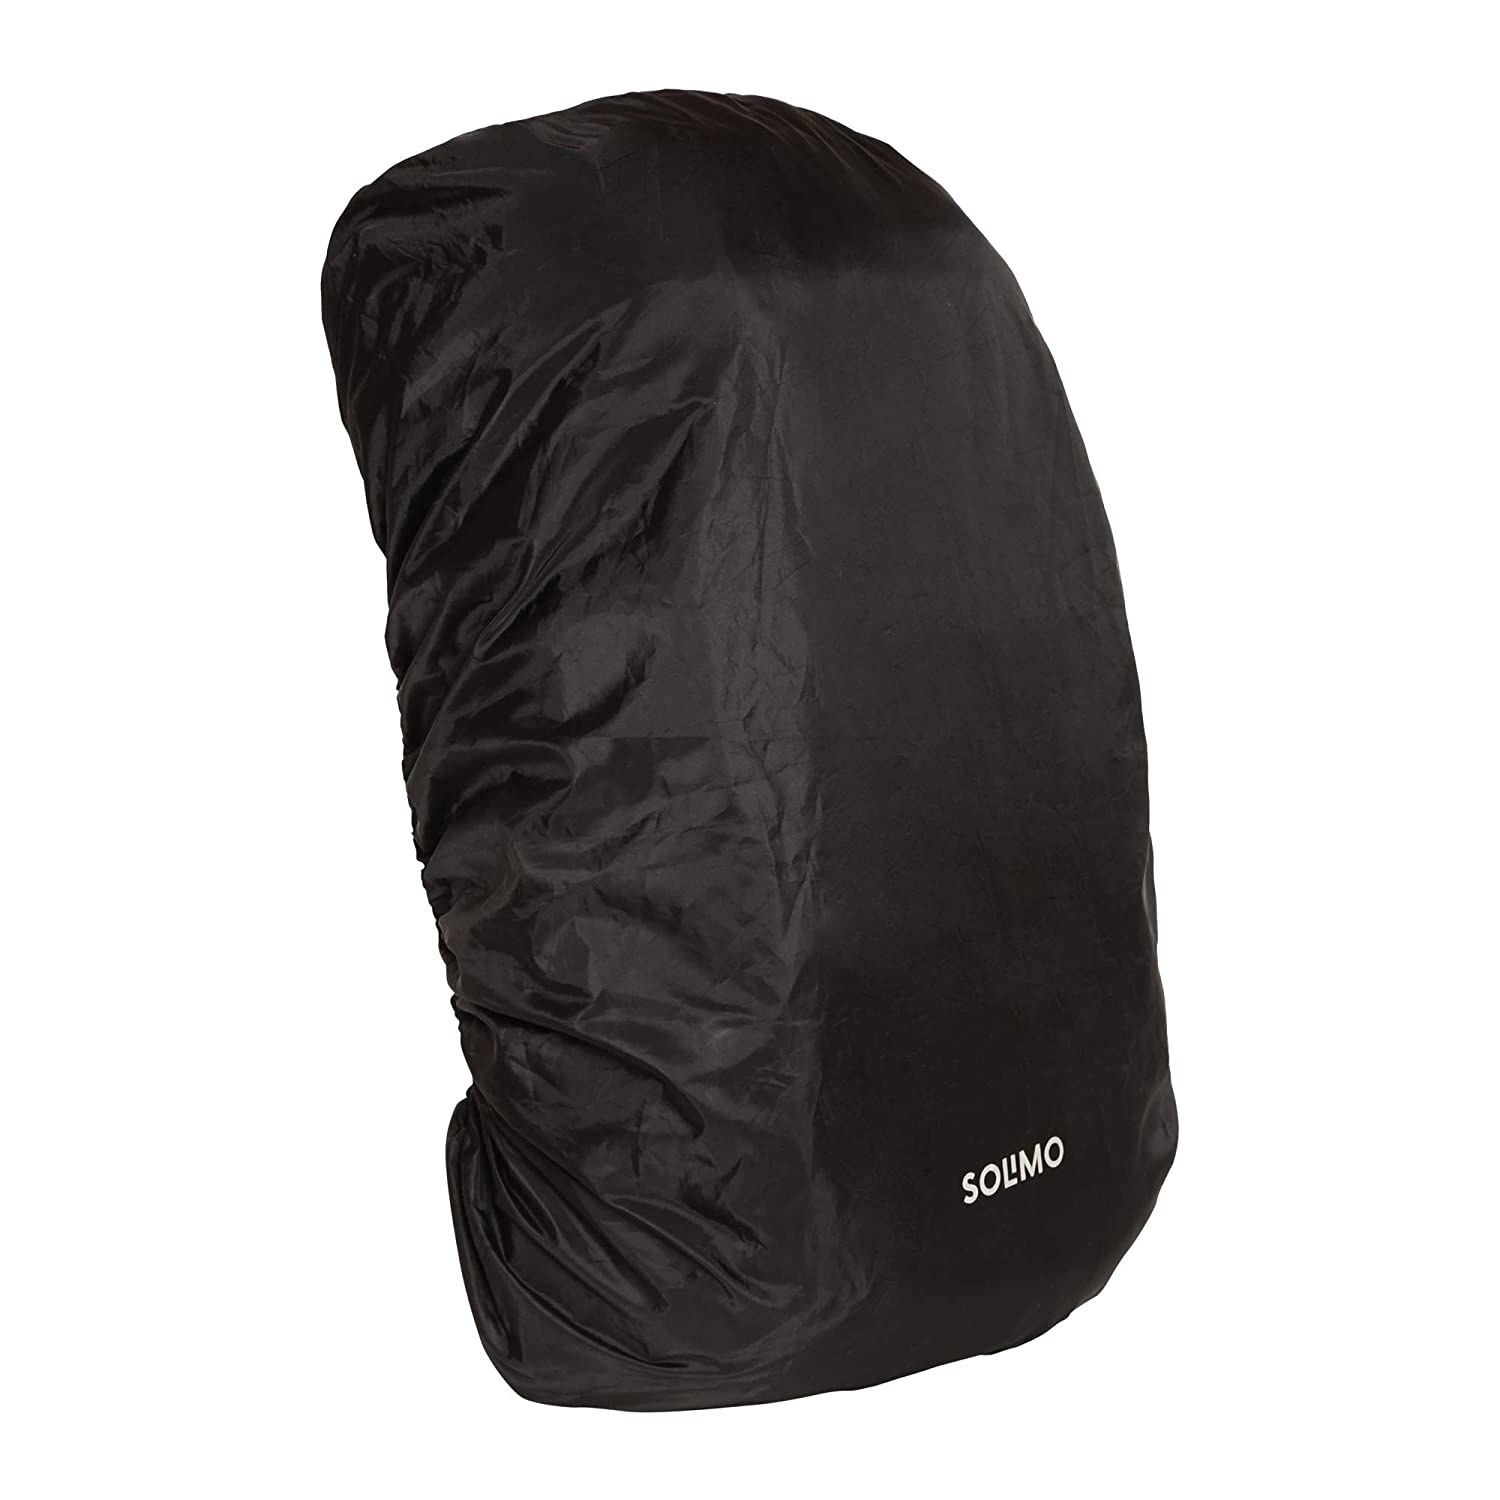 A black backpack cover.